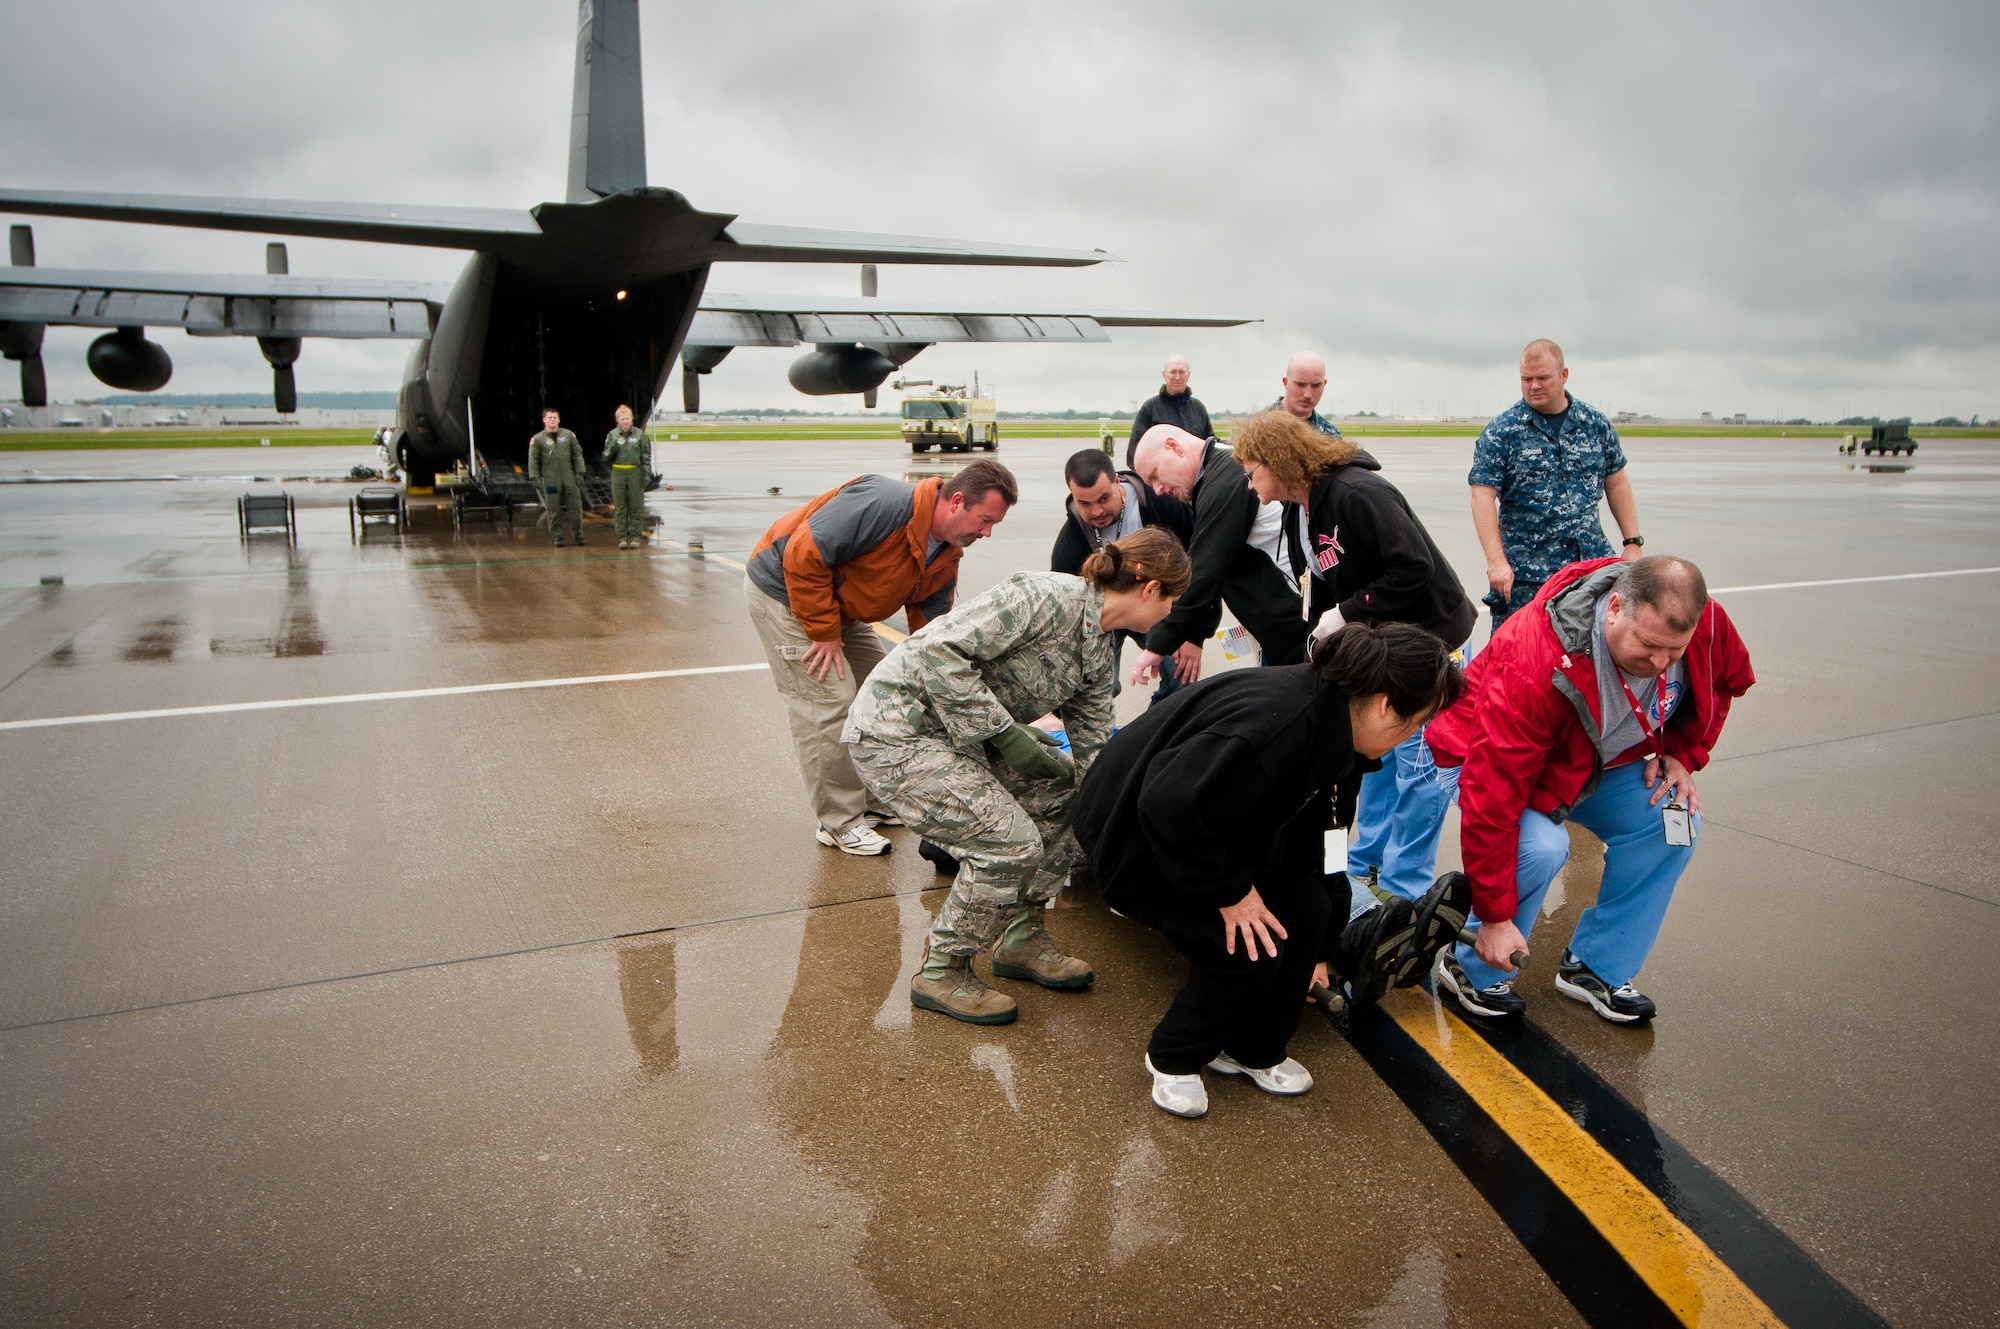 Volunteers for the National Disaster Medical System carry simulated patients off a C-130 during a earthquake-response exercise held May 18, 2011, at the Kentucky Air National Guard Base in Louisville, Ky. Operated by the U.S. Department of Health and Human Services with volunteers from multiple agencies like the Department of Veterans Affairs, NDMS was created to manage the federal government’s overall medical response to major emergencies and disasters. (U.S. Air Force photo by Maj. Dale Greer)